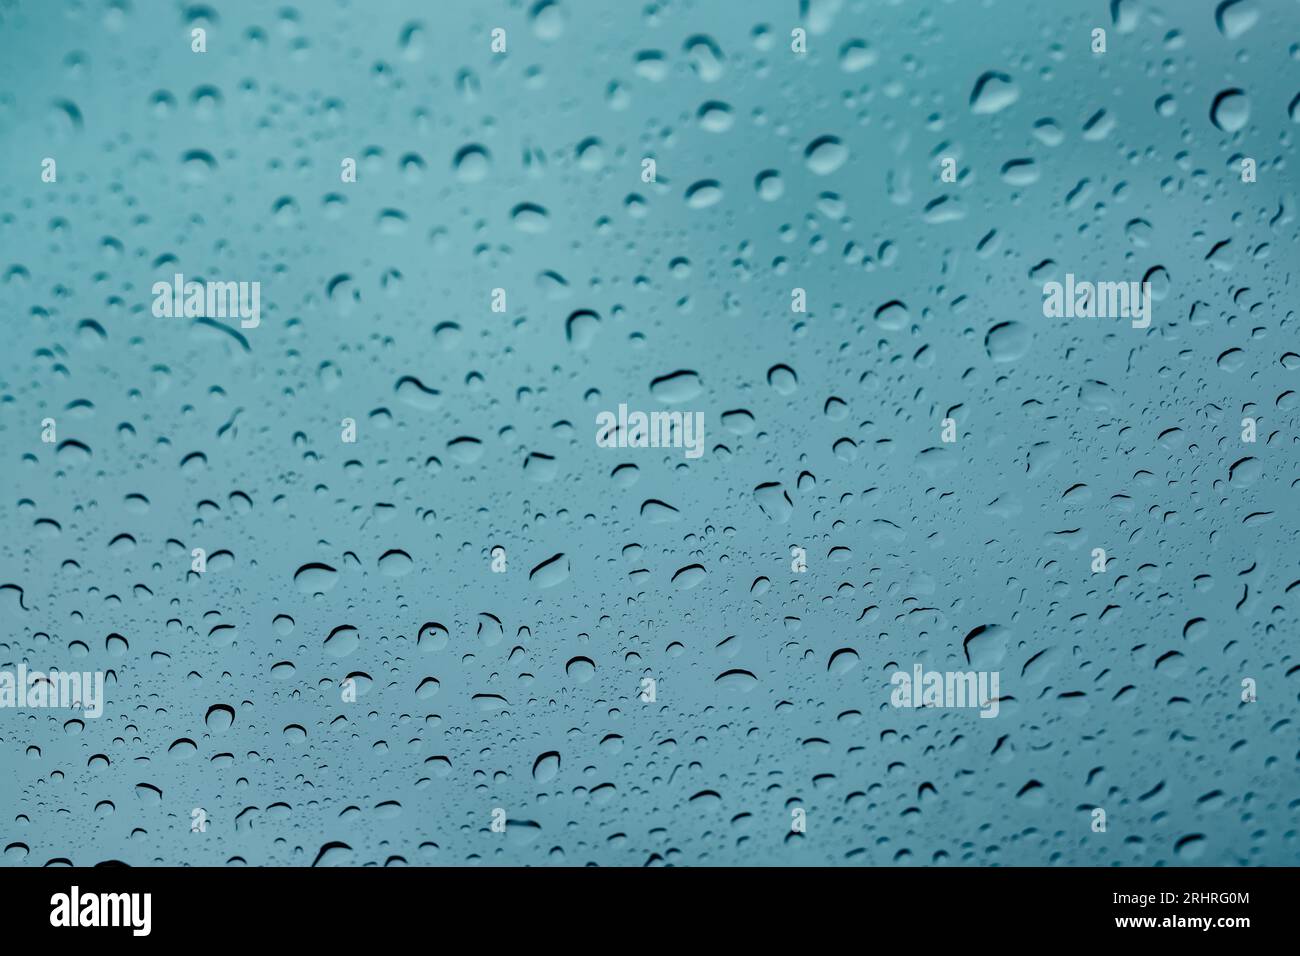 Rain water drops on glass close-up view Stock Photo